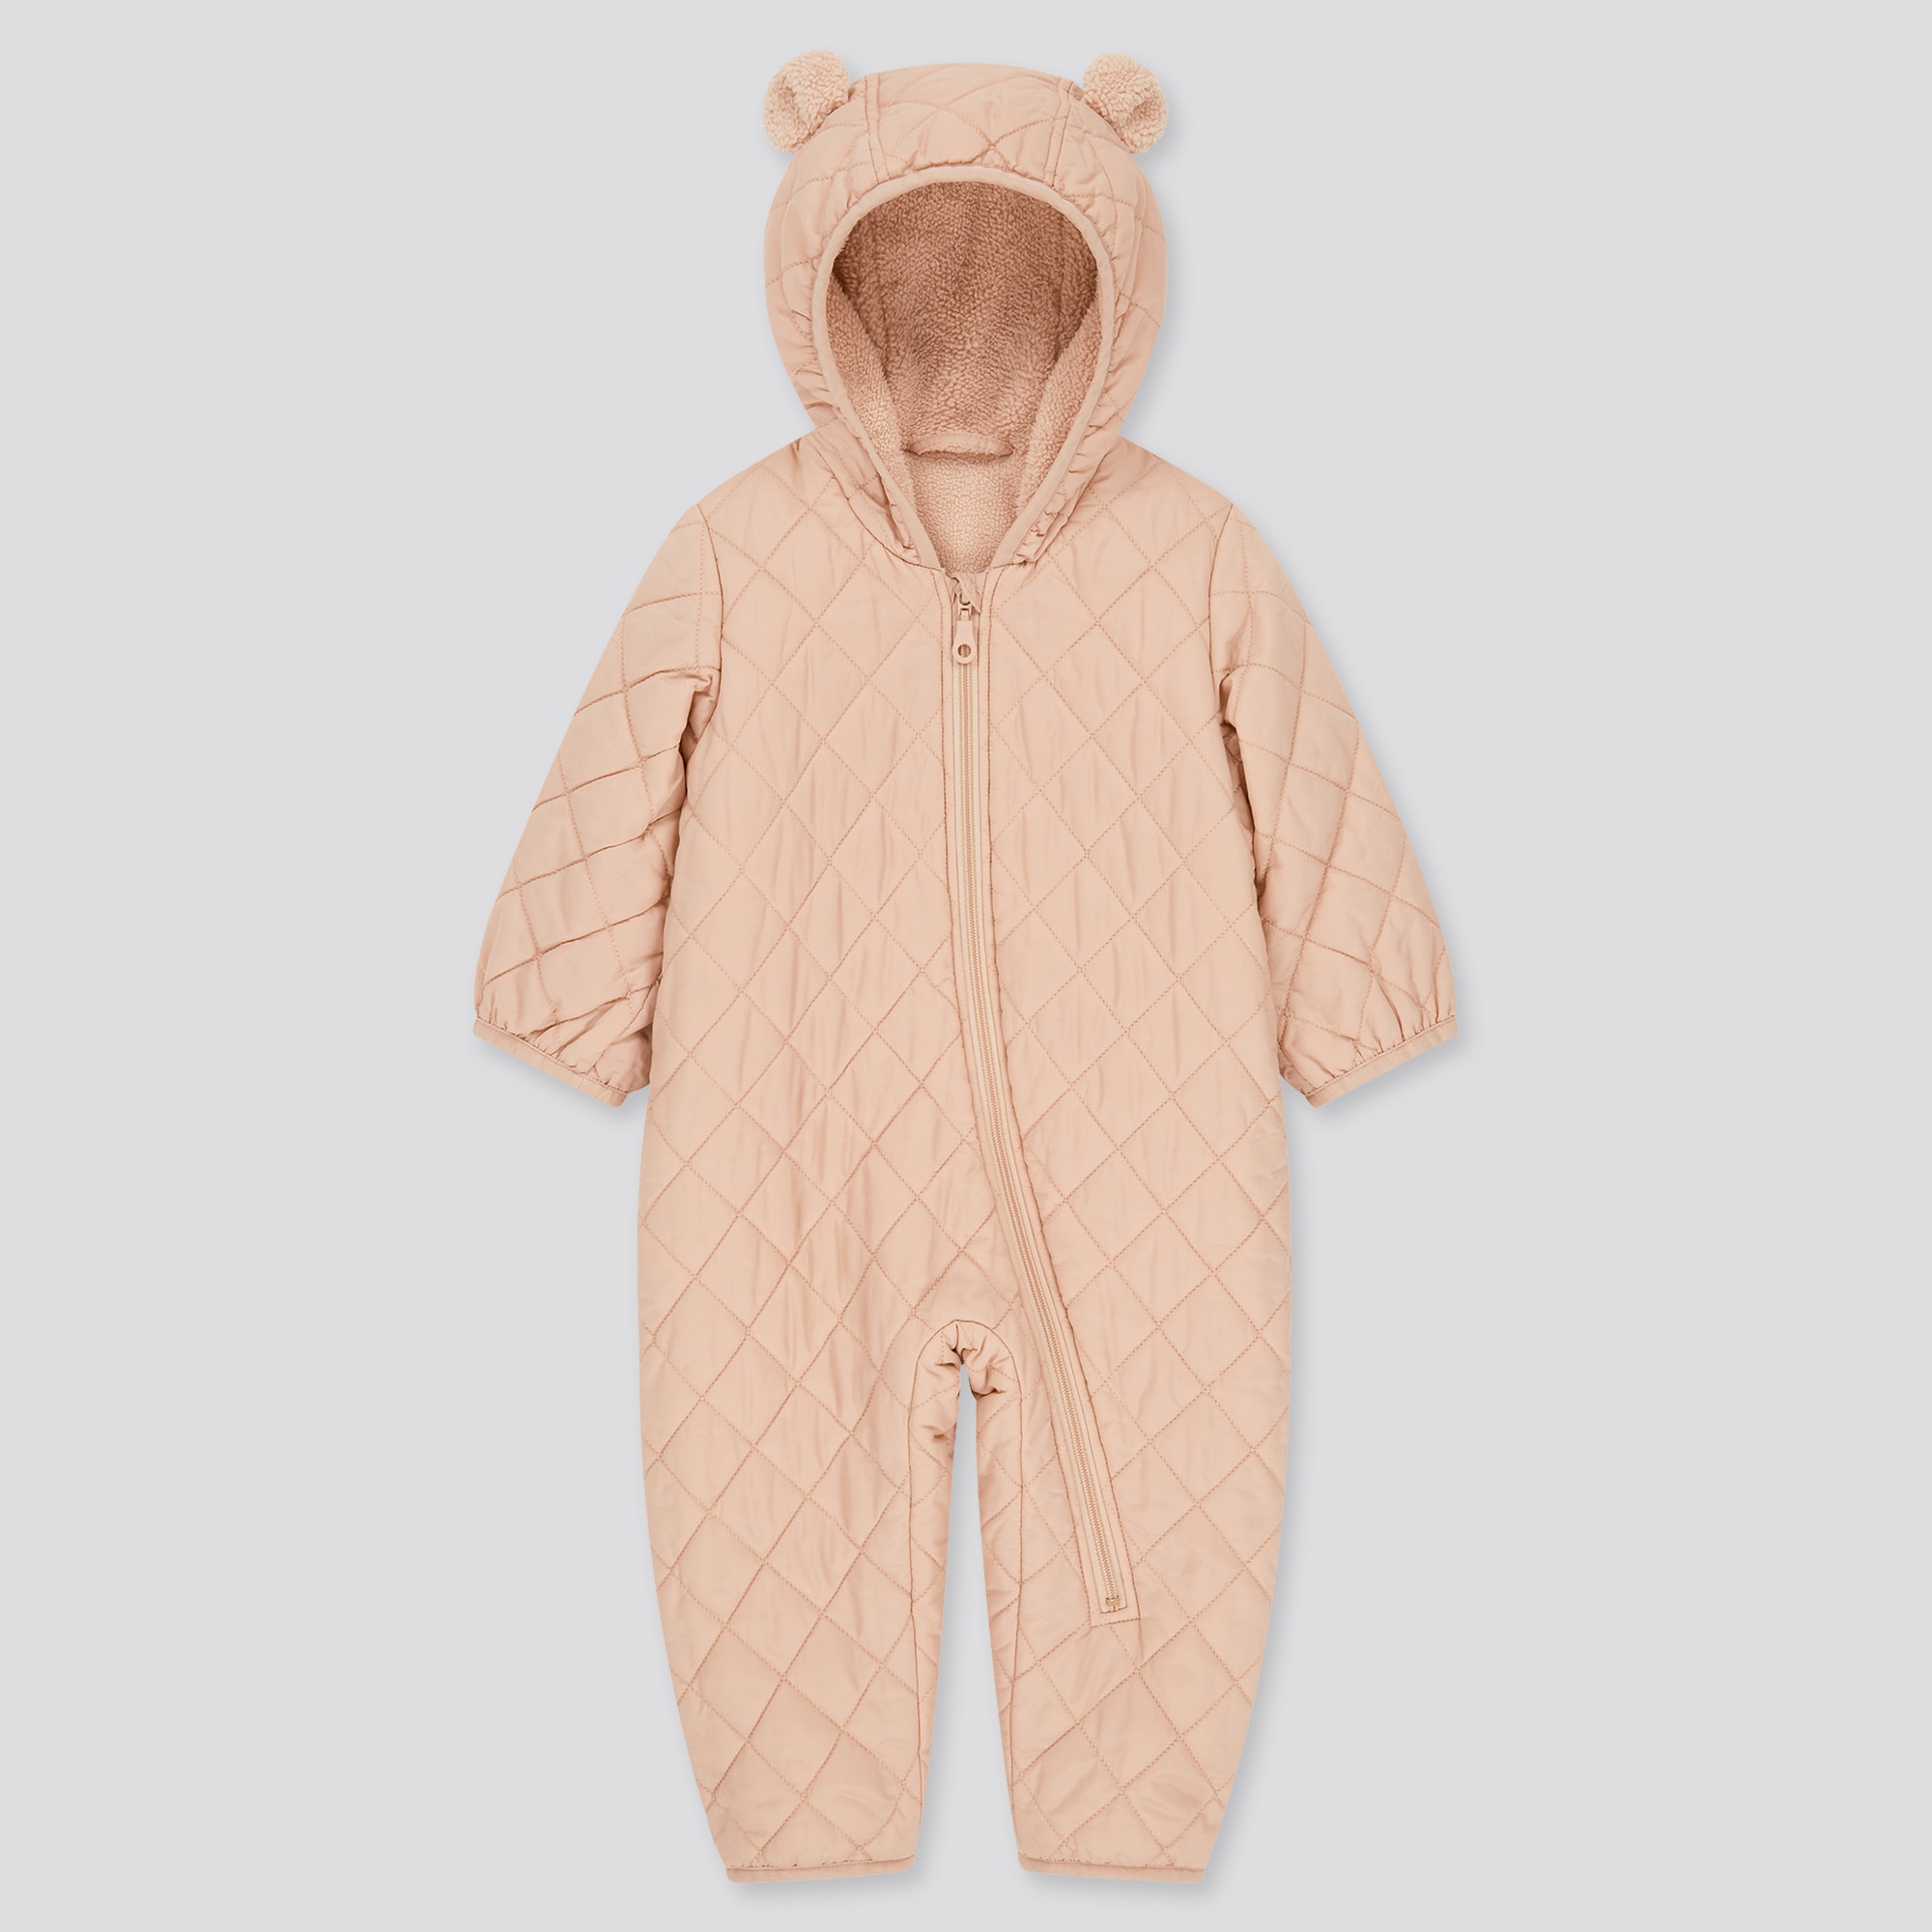 warm baby outfits